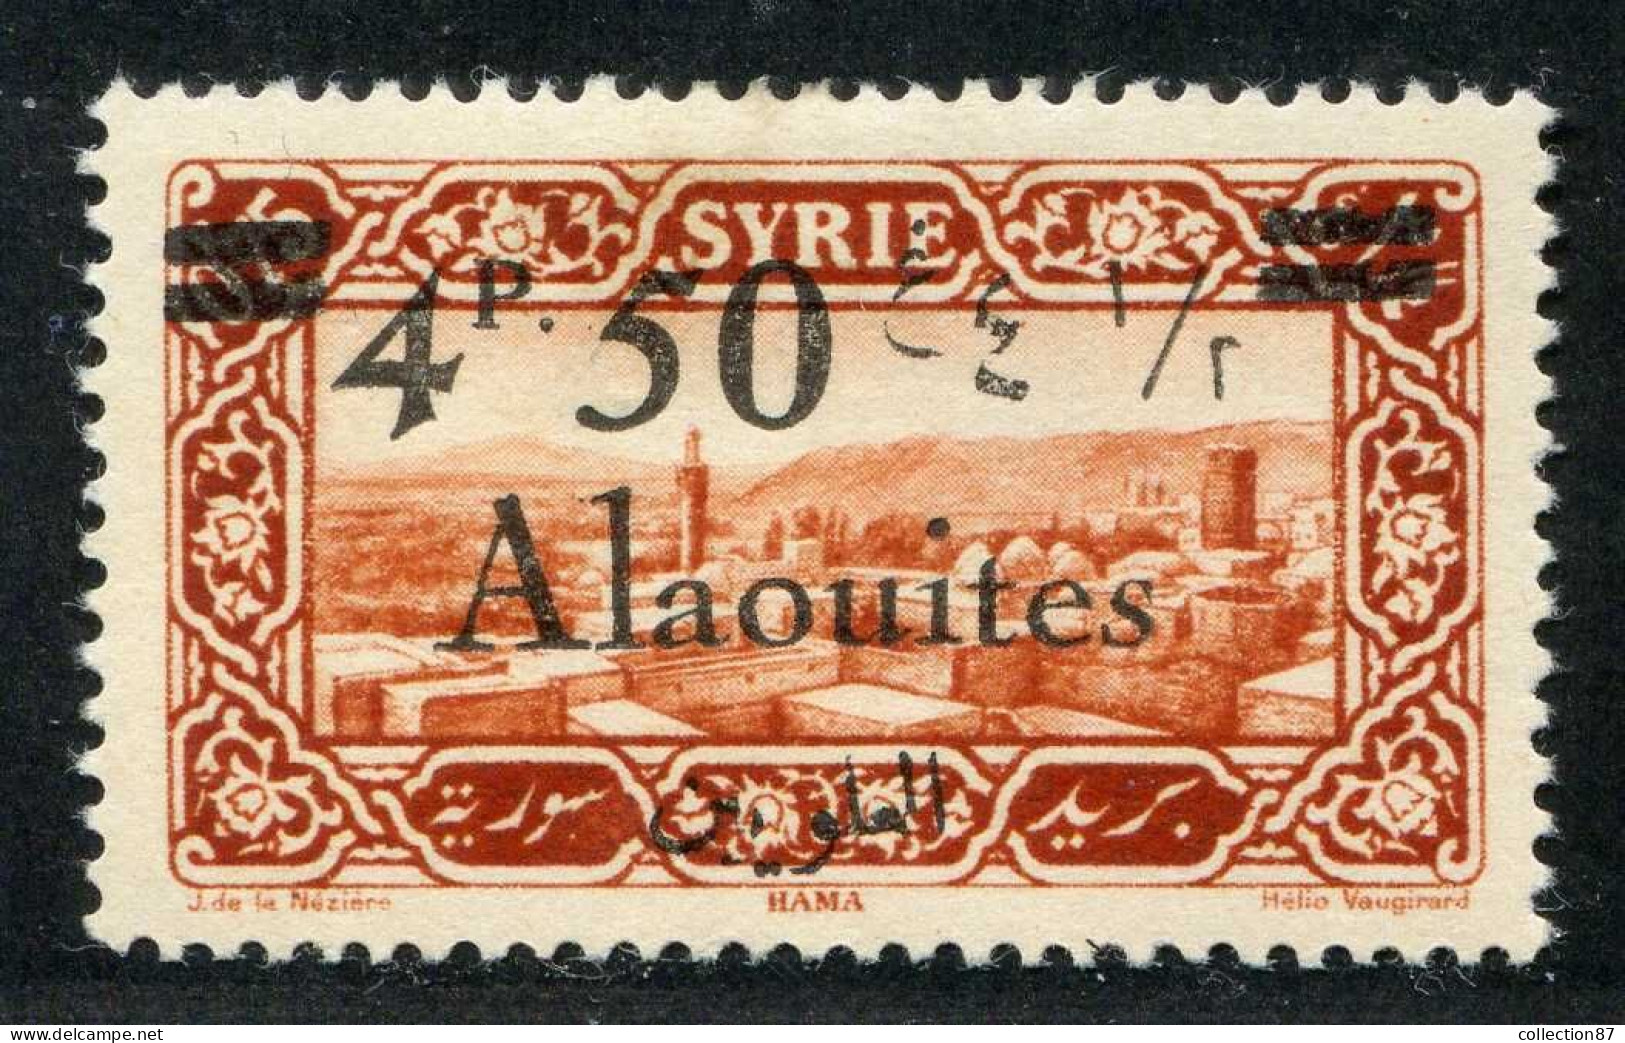 REF 089 > ALAOUITES < N° 44 * < Neuf Ch Dos Visible - MH * - Nuevos